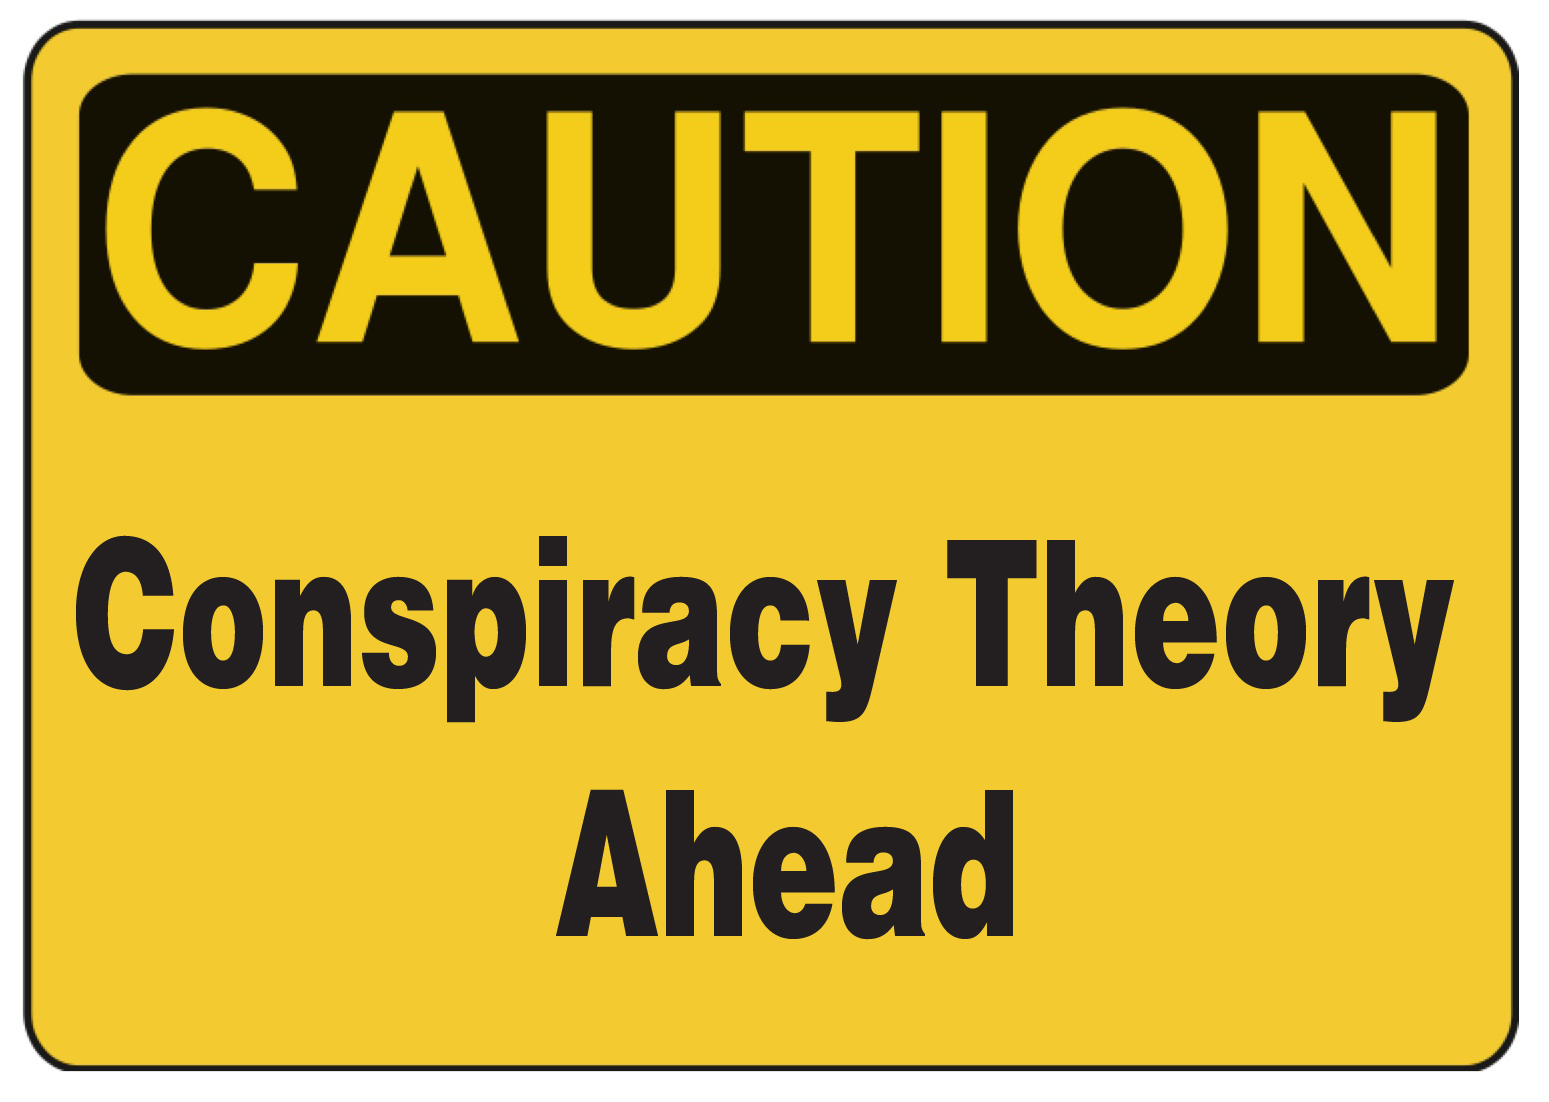 TheNewVerse.News : CONSPIRACY THEORETICAL WITCH HUNTS